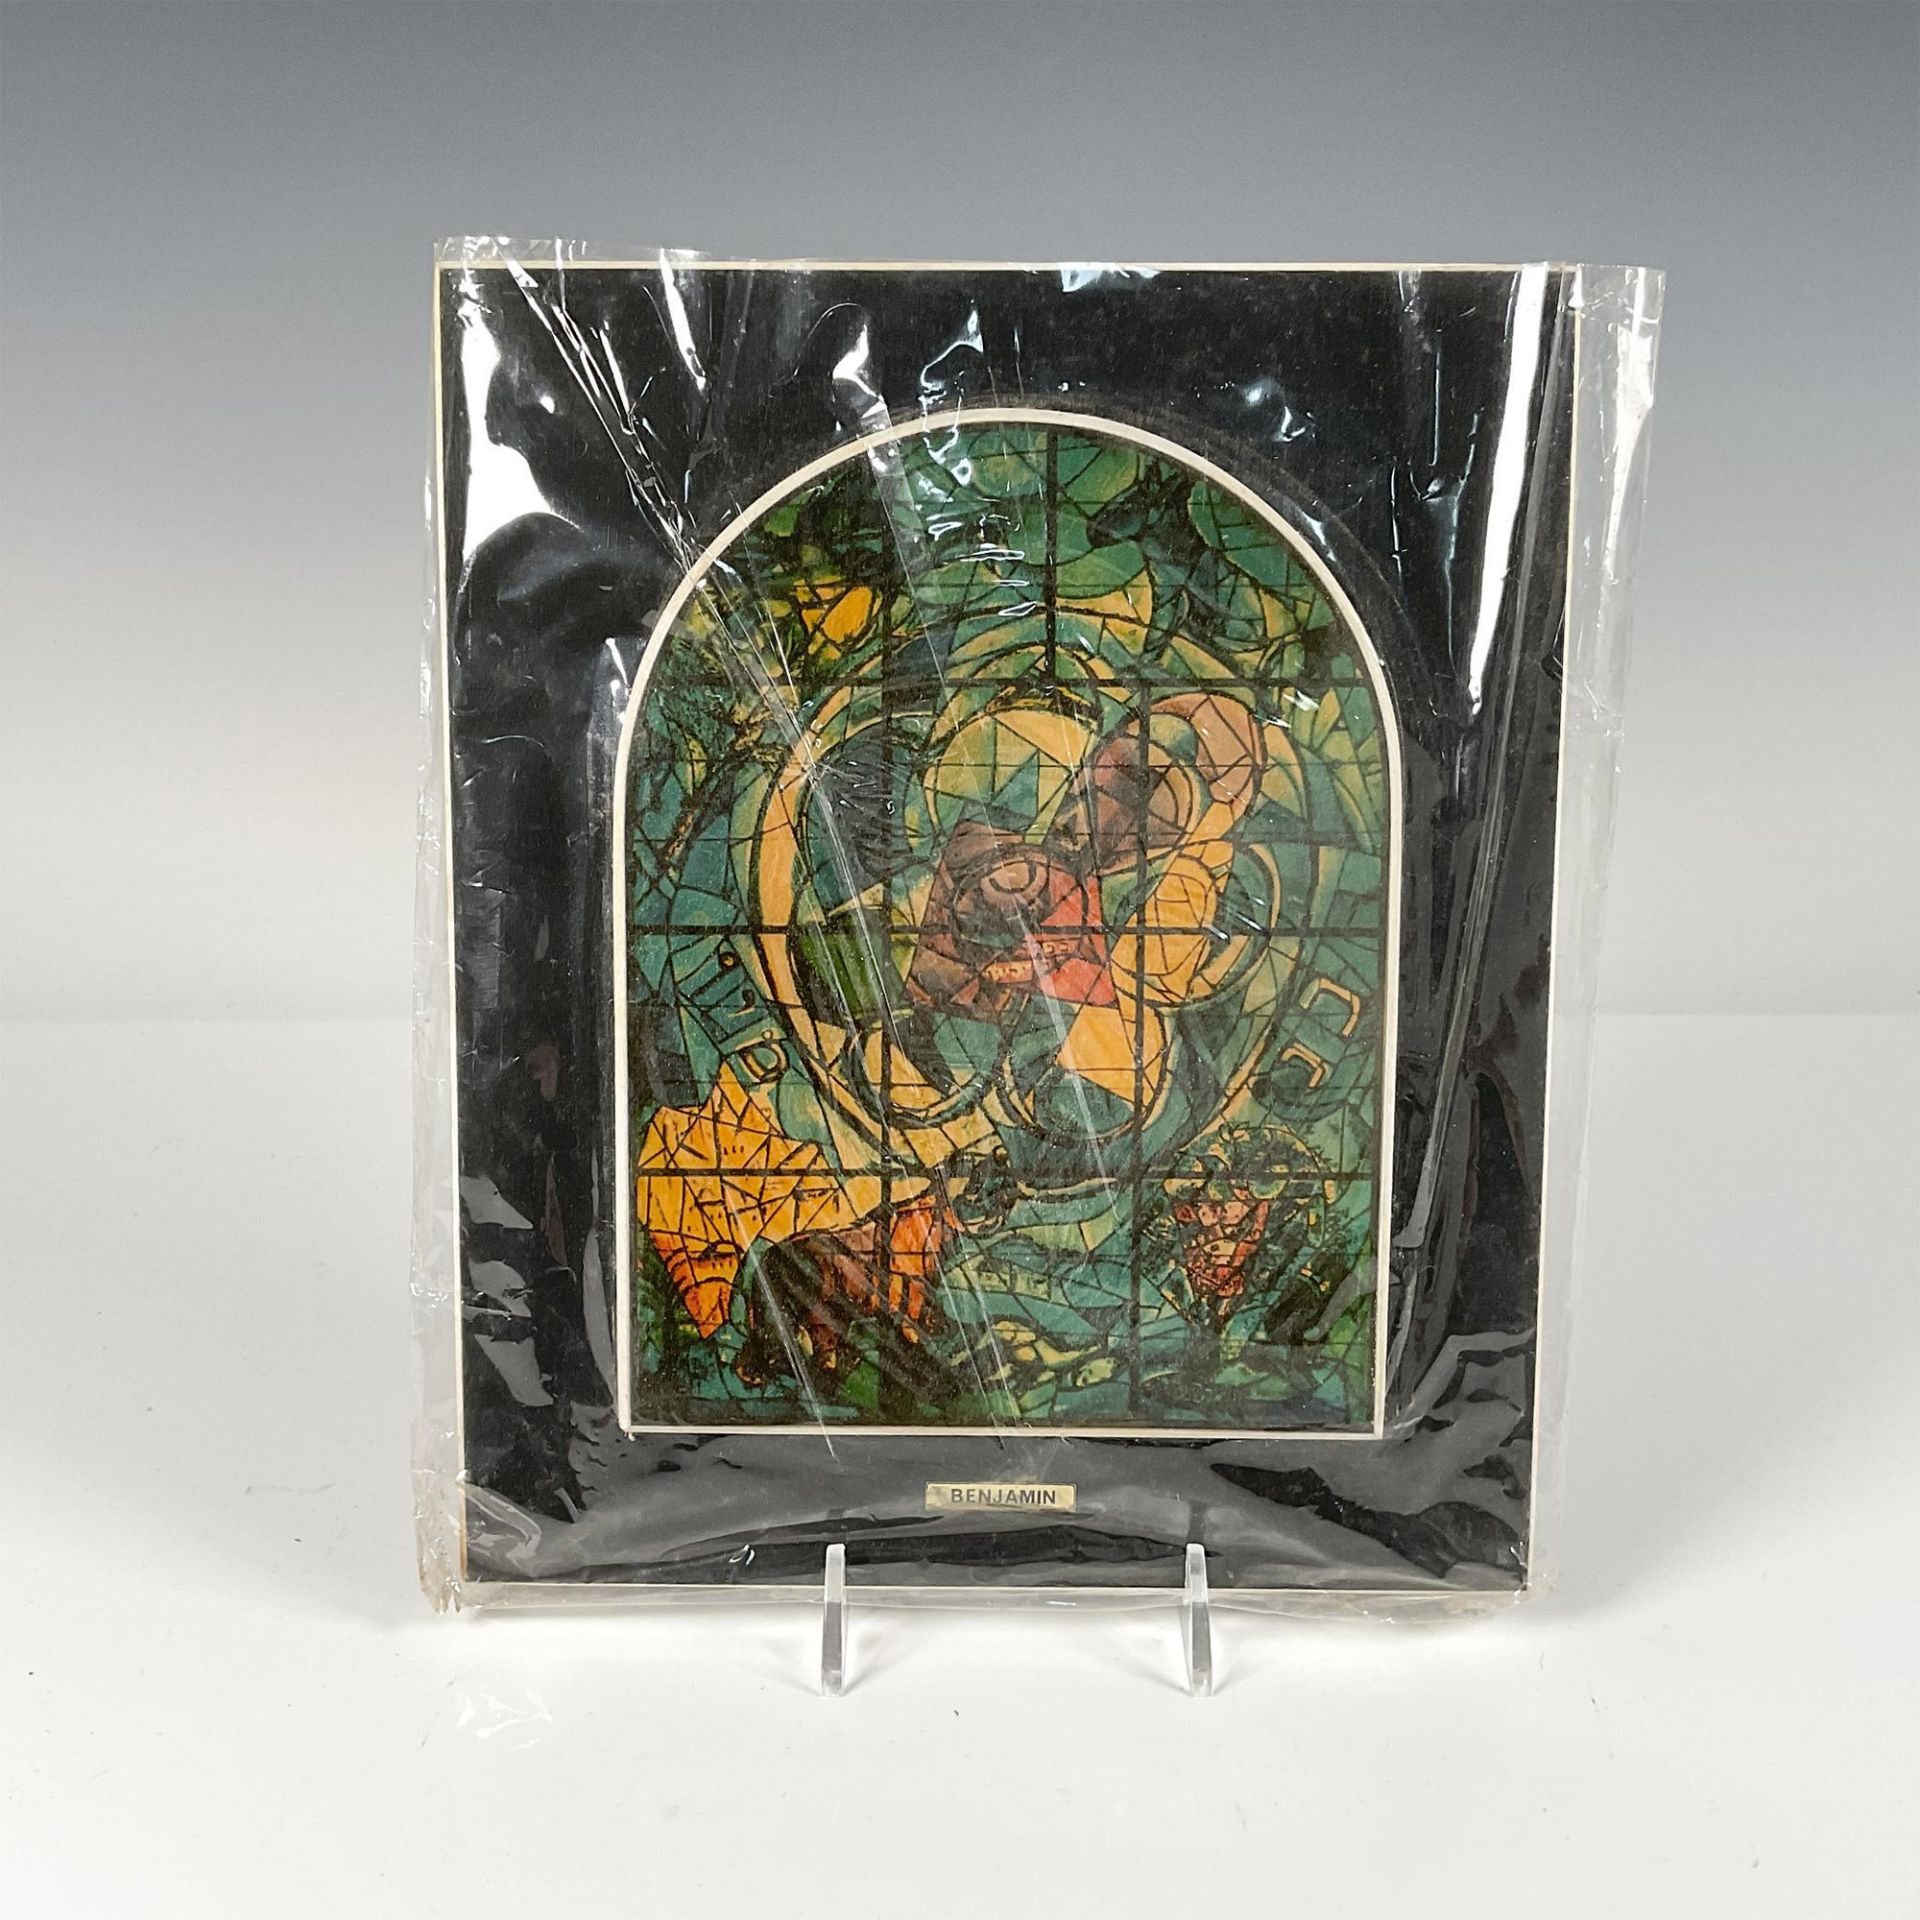 13pc After Marc Chagall by Avissar Wooden Plaques, The 12 Stained Glass Windows - Image 20 of 20